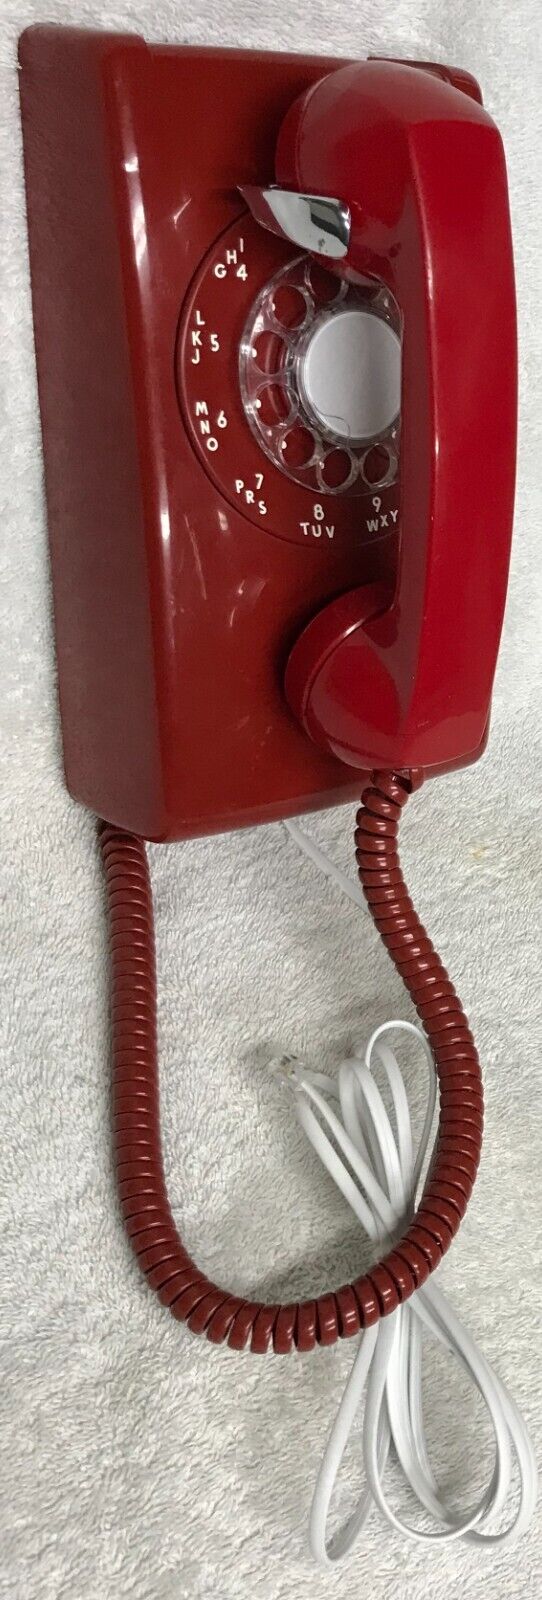 Vintage 1950s WESTERN ELECTRIC A/B 554 2-57 RED Rotary Wall Mount Telephone